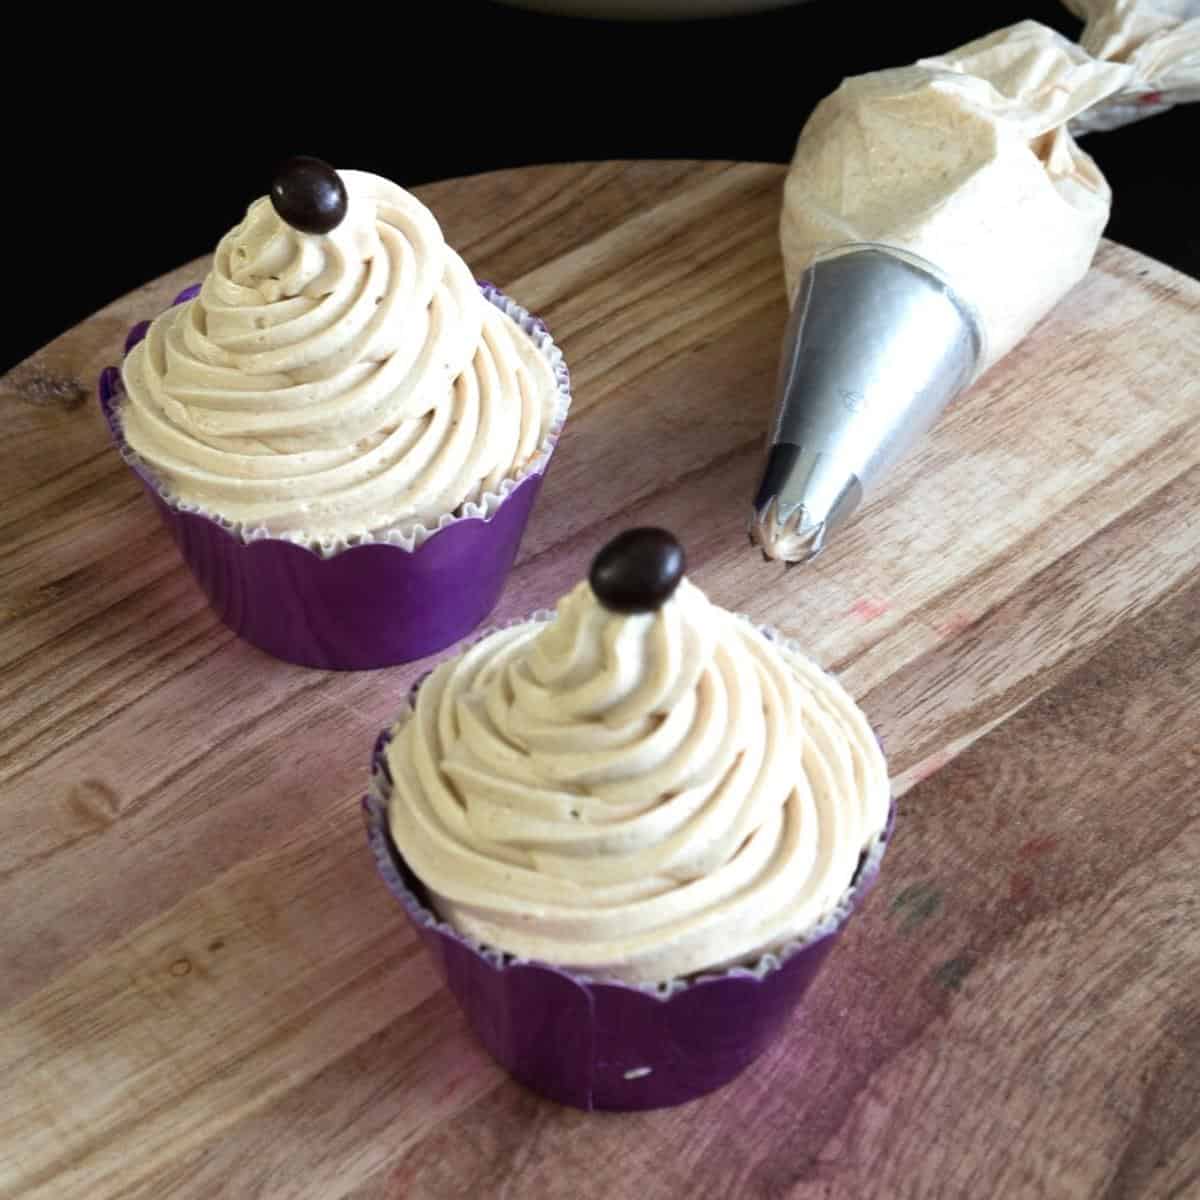 Two cupcakes frosted with coffee